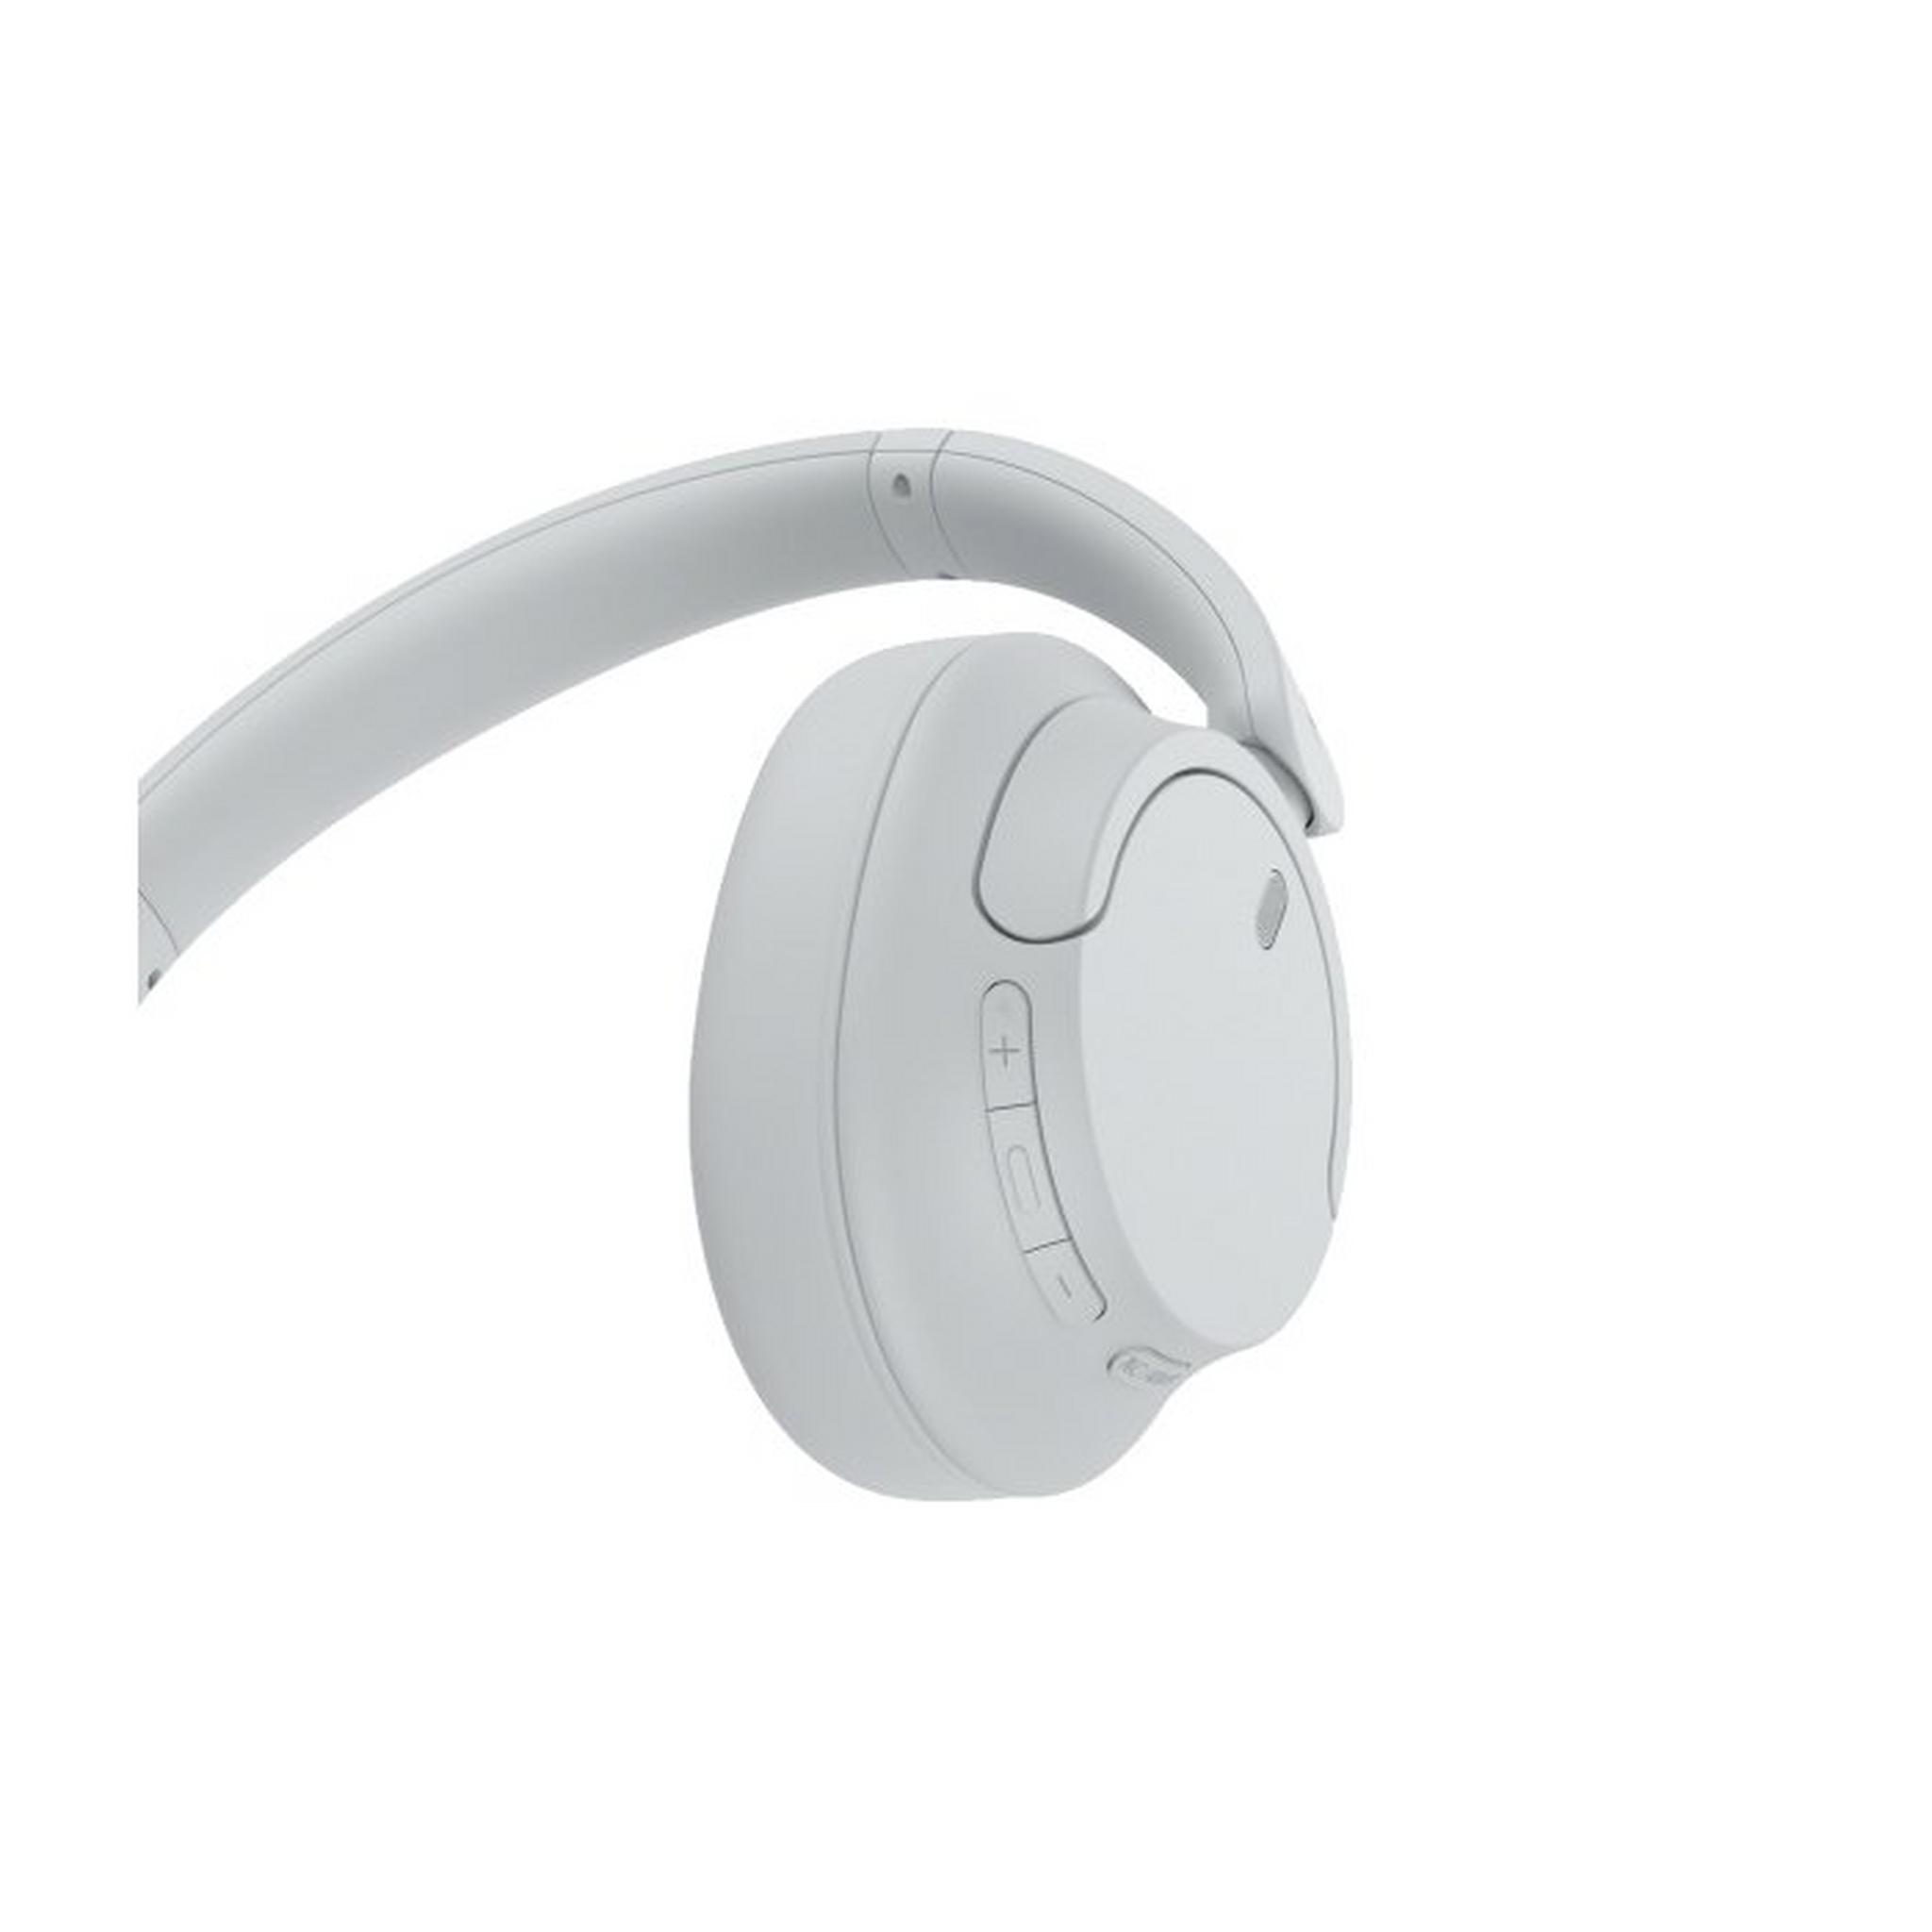 SONY Wireless Noise Cancelling Headphone, WH-CH720N/WCE - White